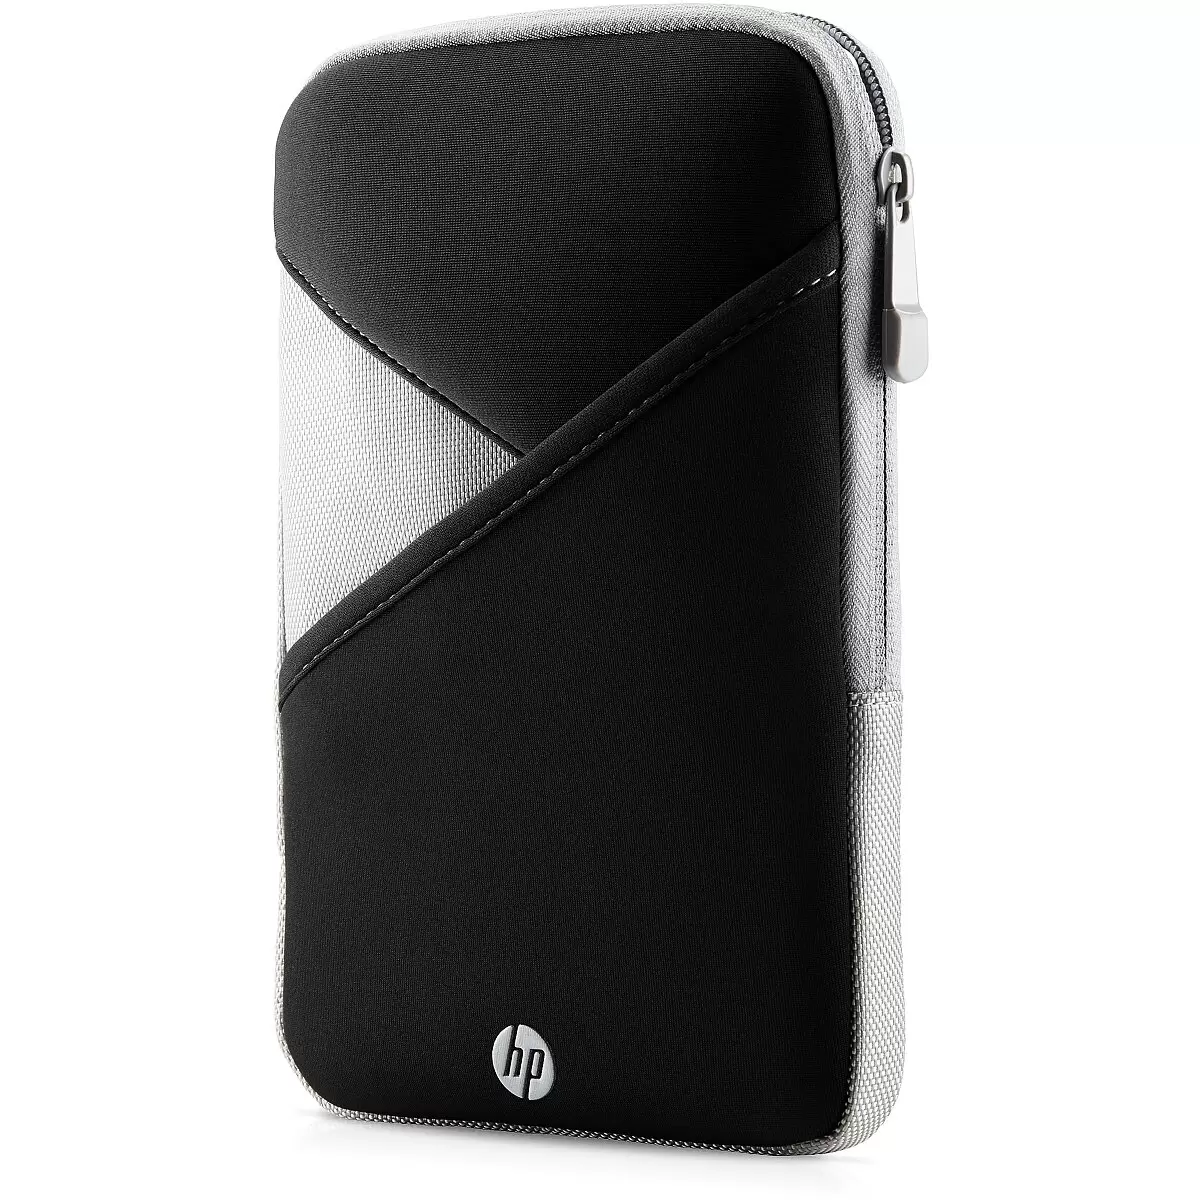 HP 8inch Zippered Tablet Sleeve EURO